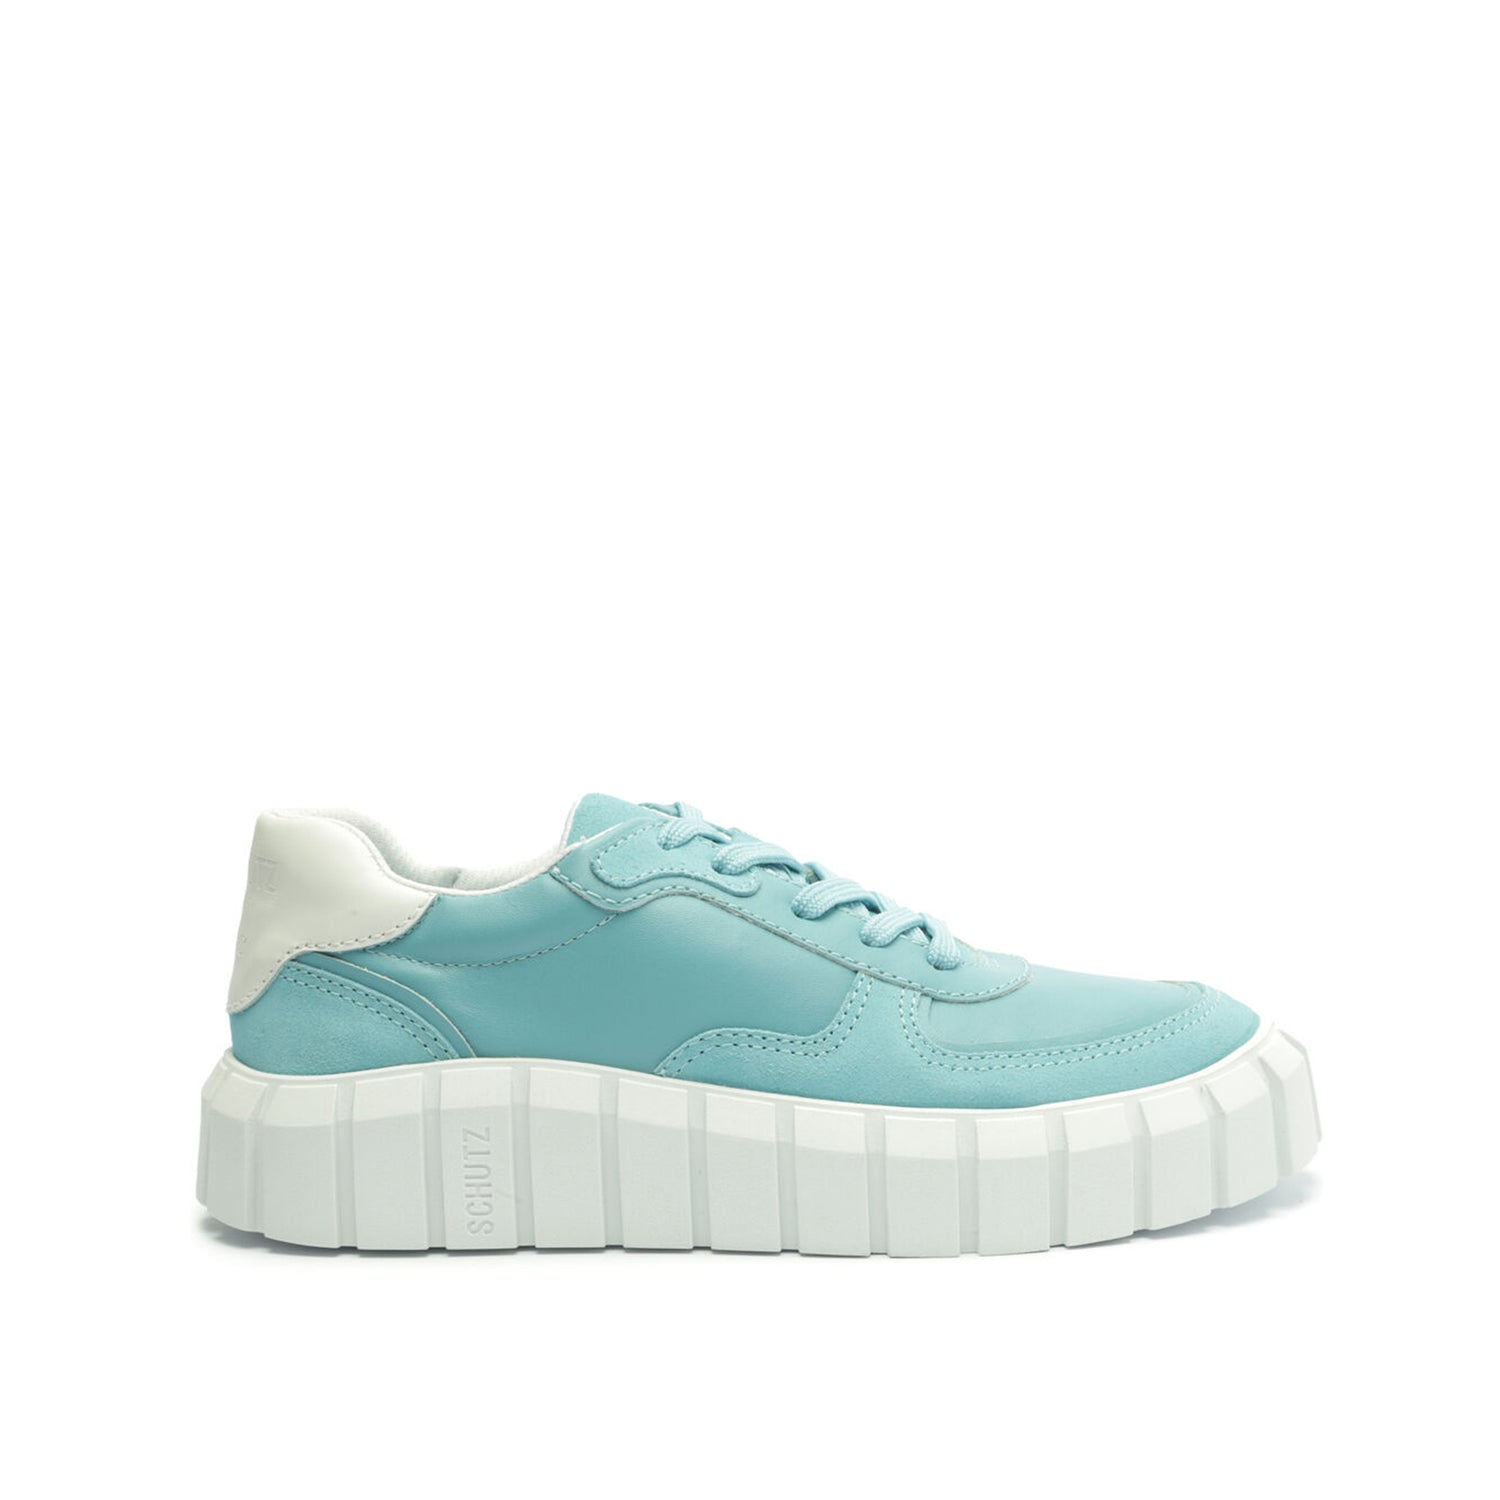 Timony Suede Sneaker Sneakers Fall 22 5 Sea White Suede - Schutz Shoes